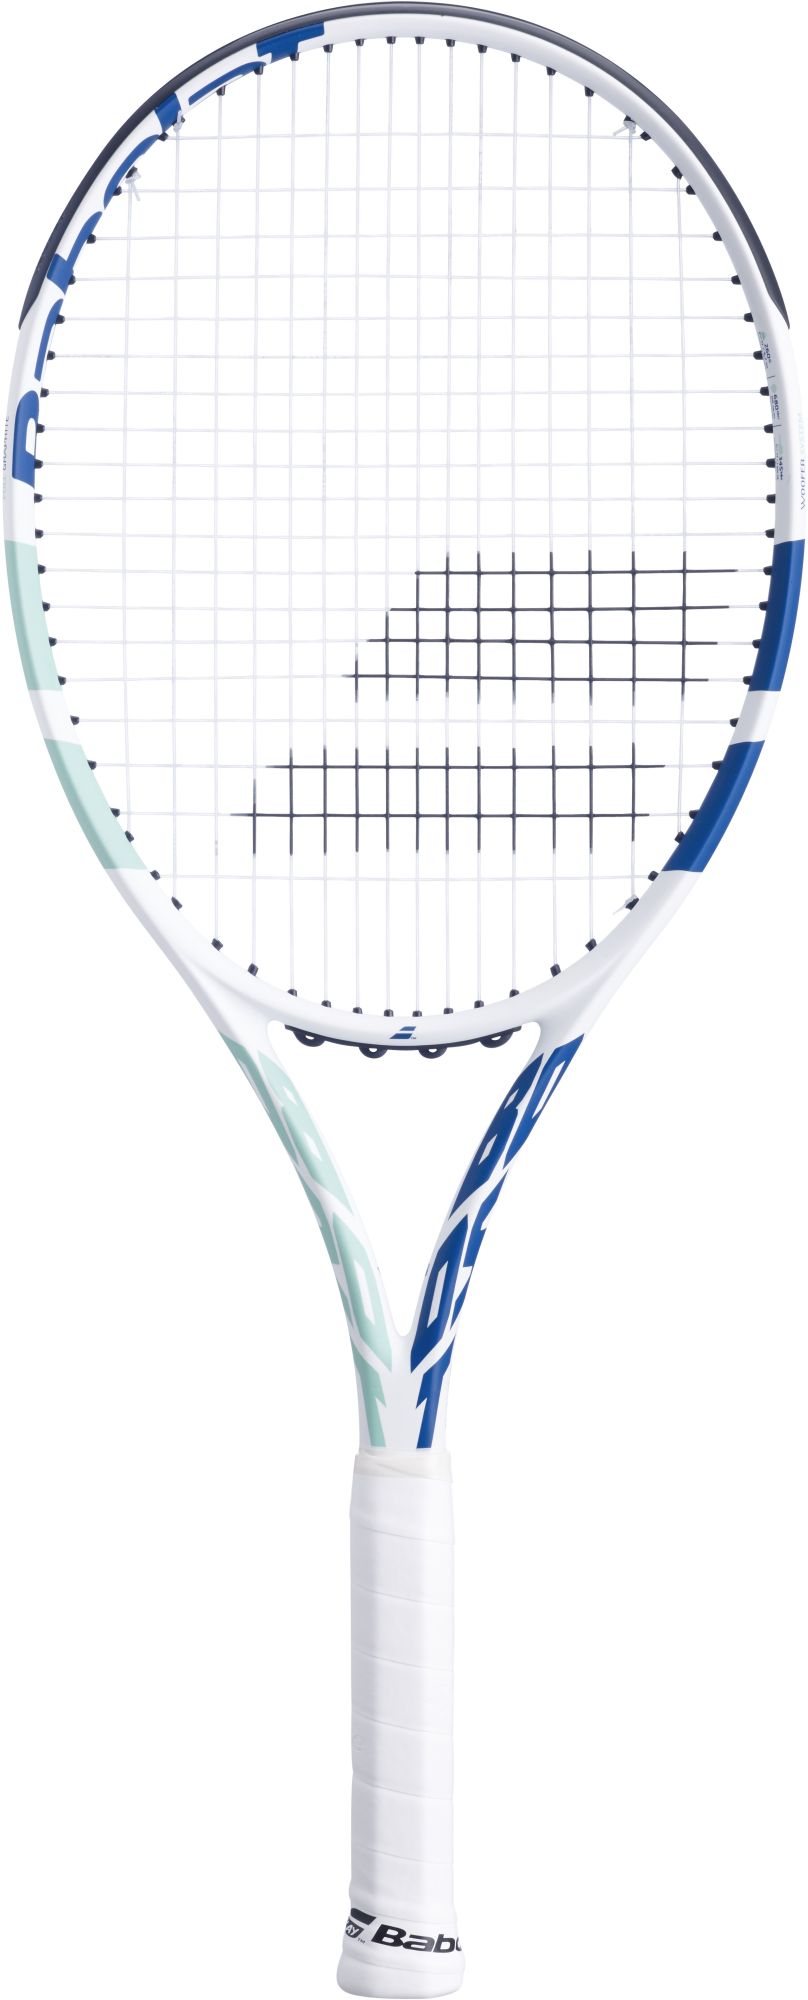 Shop by Player Type: Tennis Racquet for Women